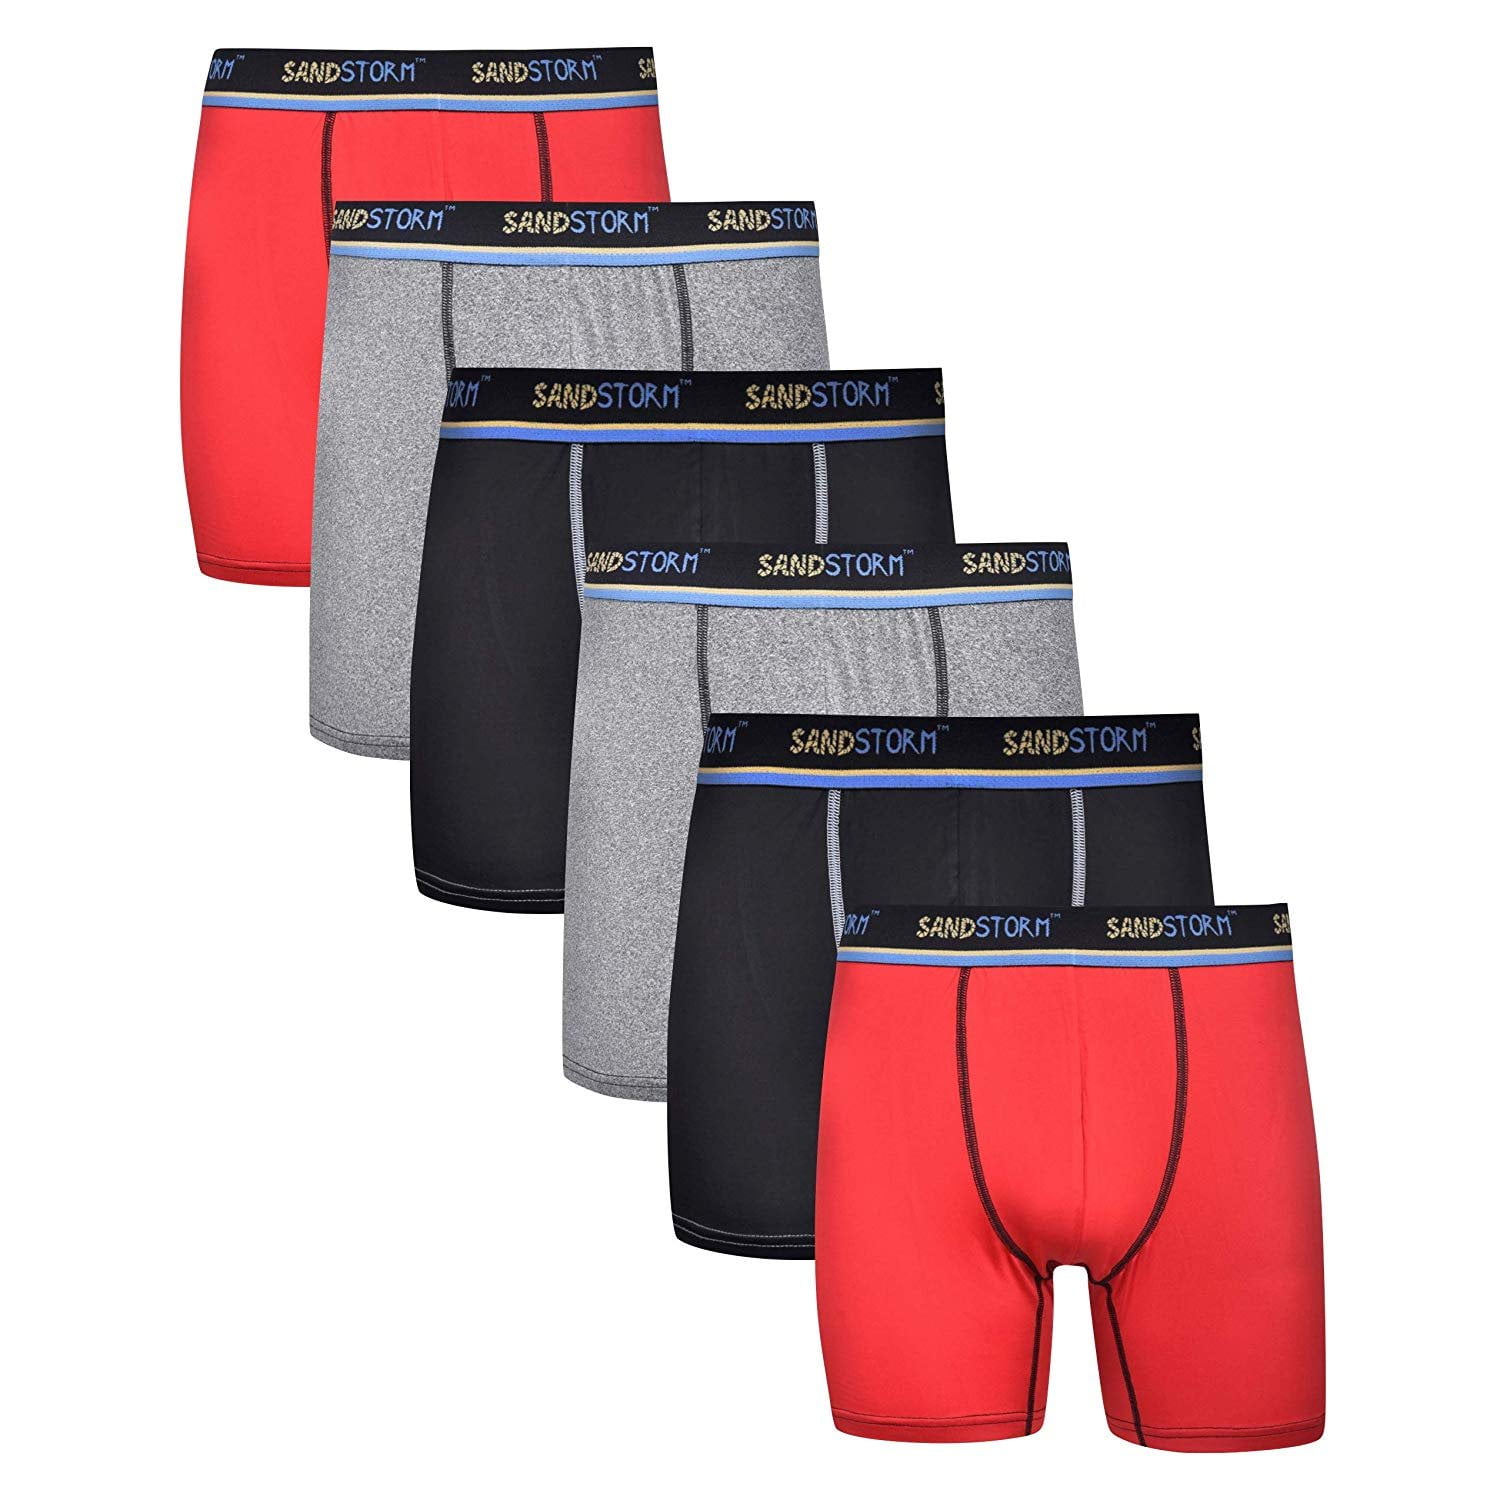 Sand Storm Mens Performance Boxer Briefs - 6-Pack No-Fly Athletic